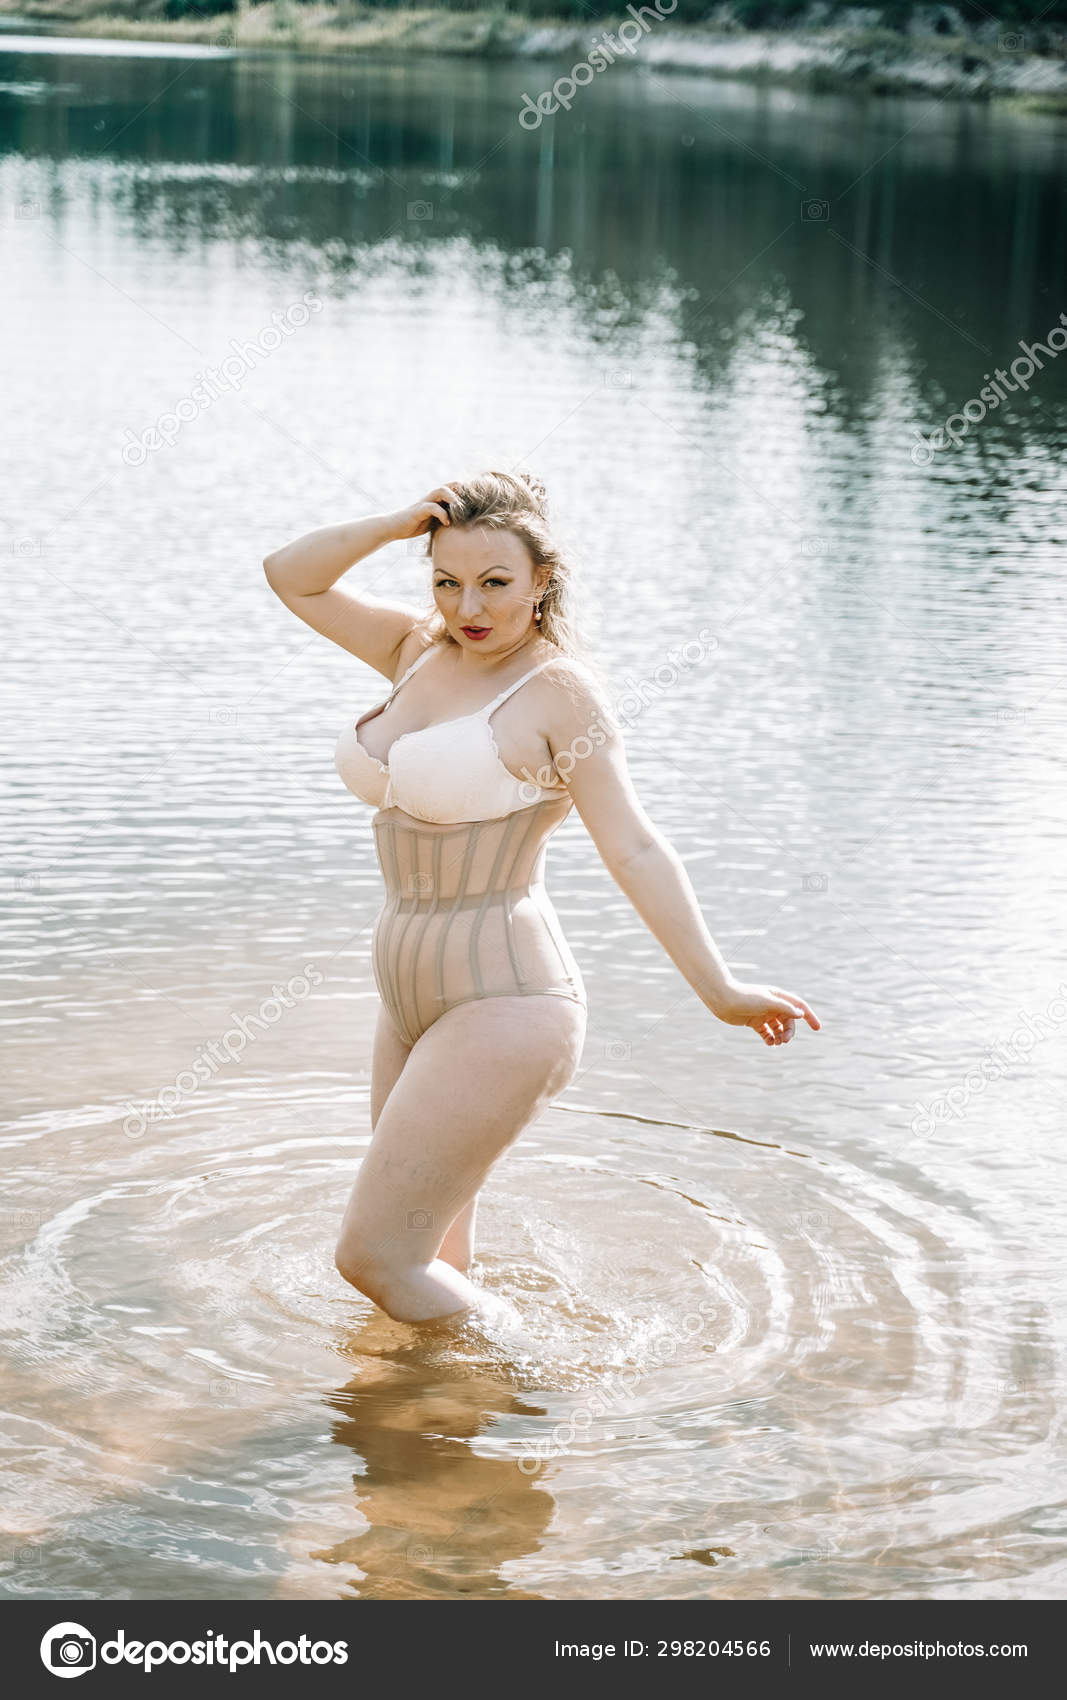 Plus Size Woman With Curvy Figure In Corset Lingerie. Caucasian Xxl Chubby  Girl Wanna Swimming. Stock Photo, Picture and Royalty Free Image. Image  128698478.